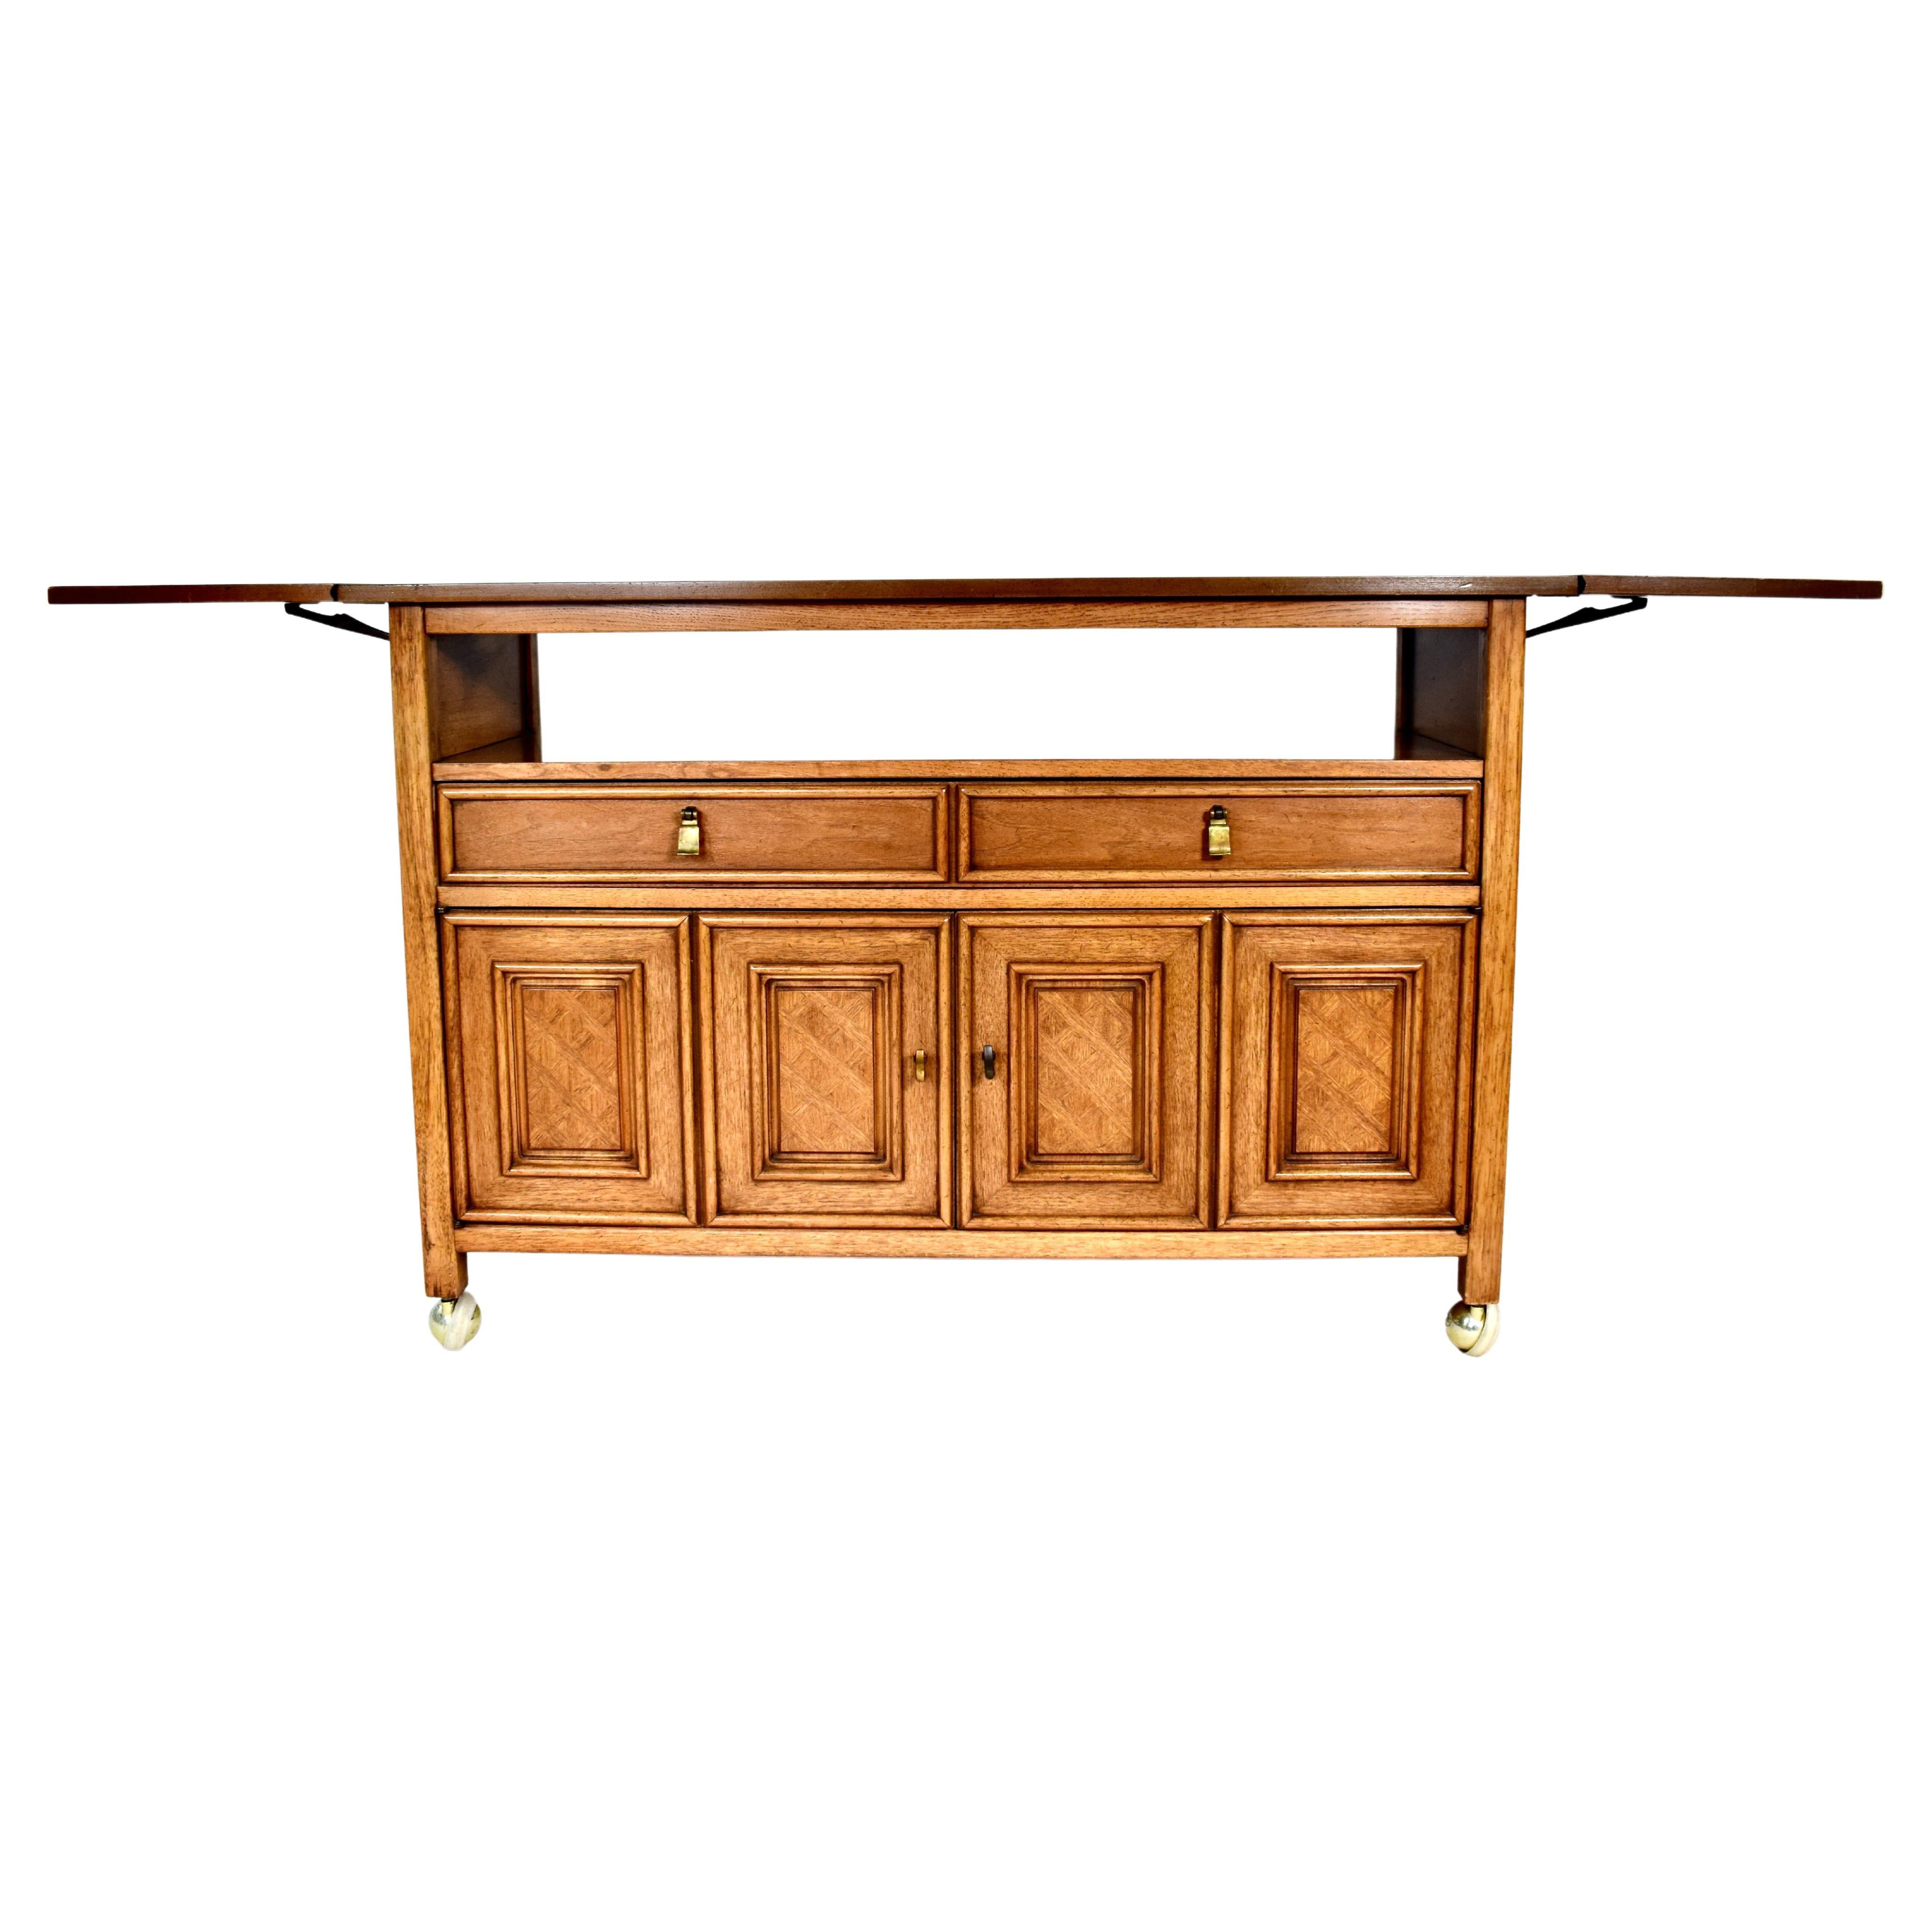 Coastal Trellis Style Buffet or Serving Table on Brass Casters